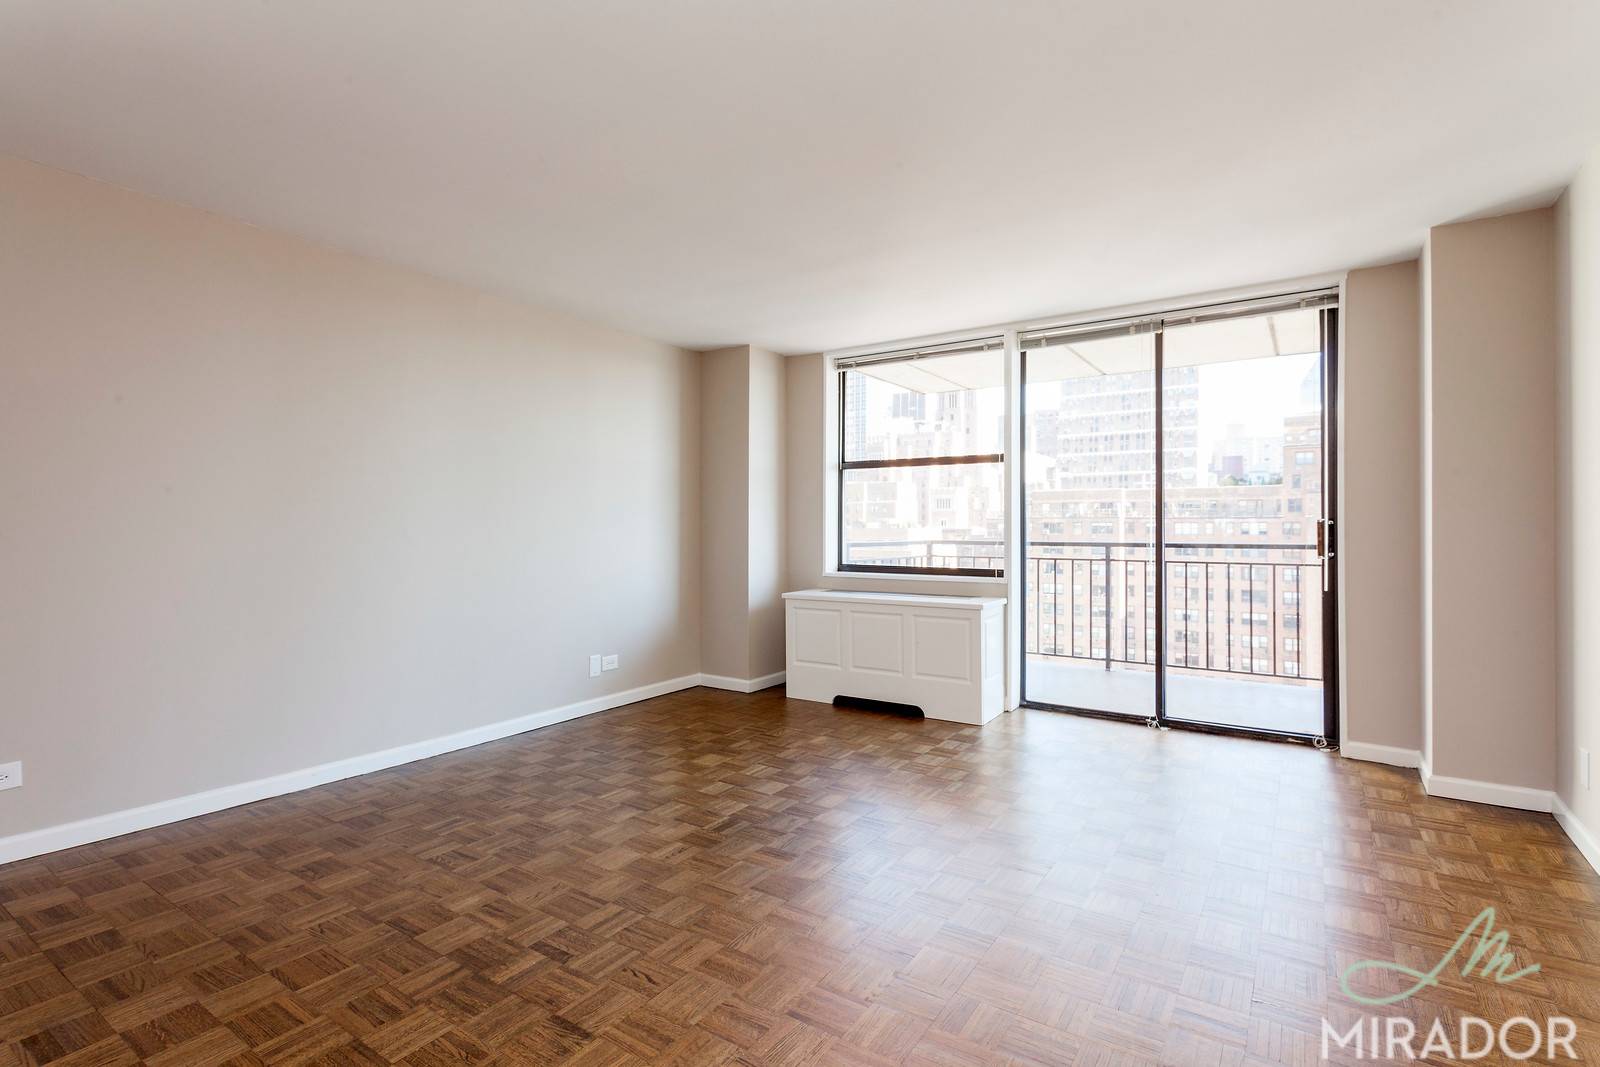 Large winged 2 bedroom 1 bath on a high floor with king sized bedrooms, great closet space and north facing balcony at New York Tower.